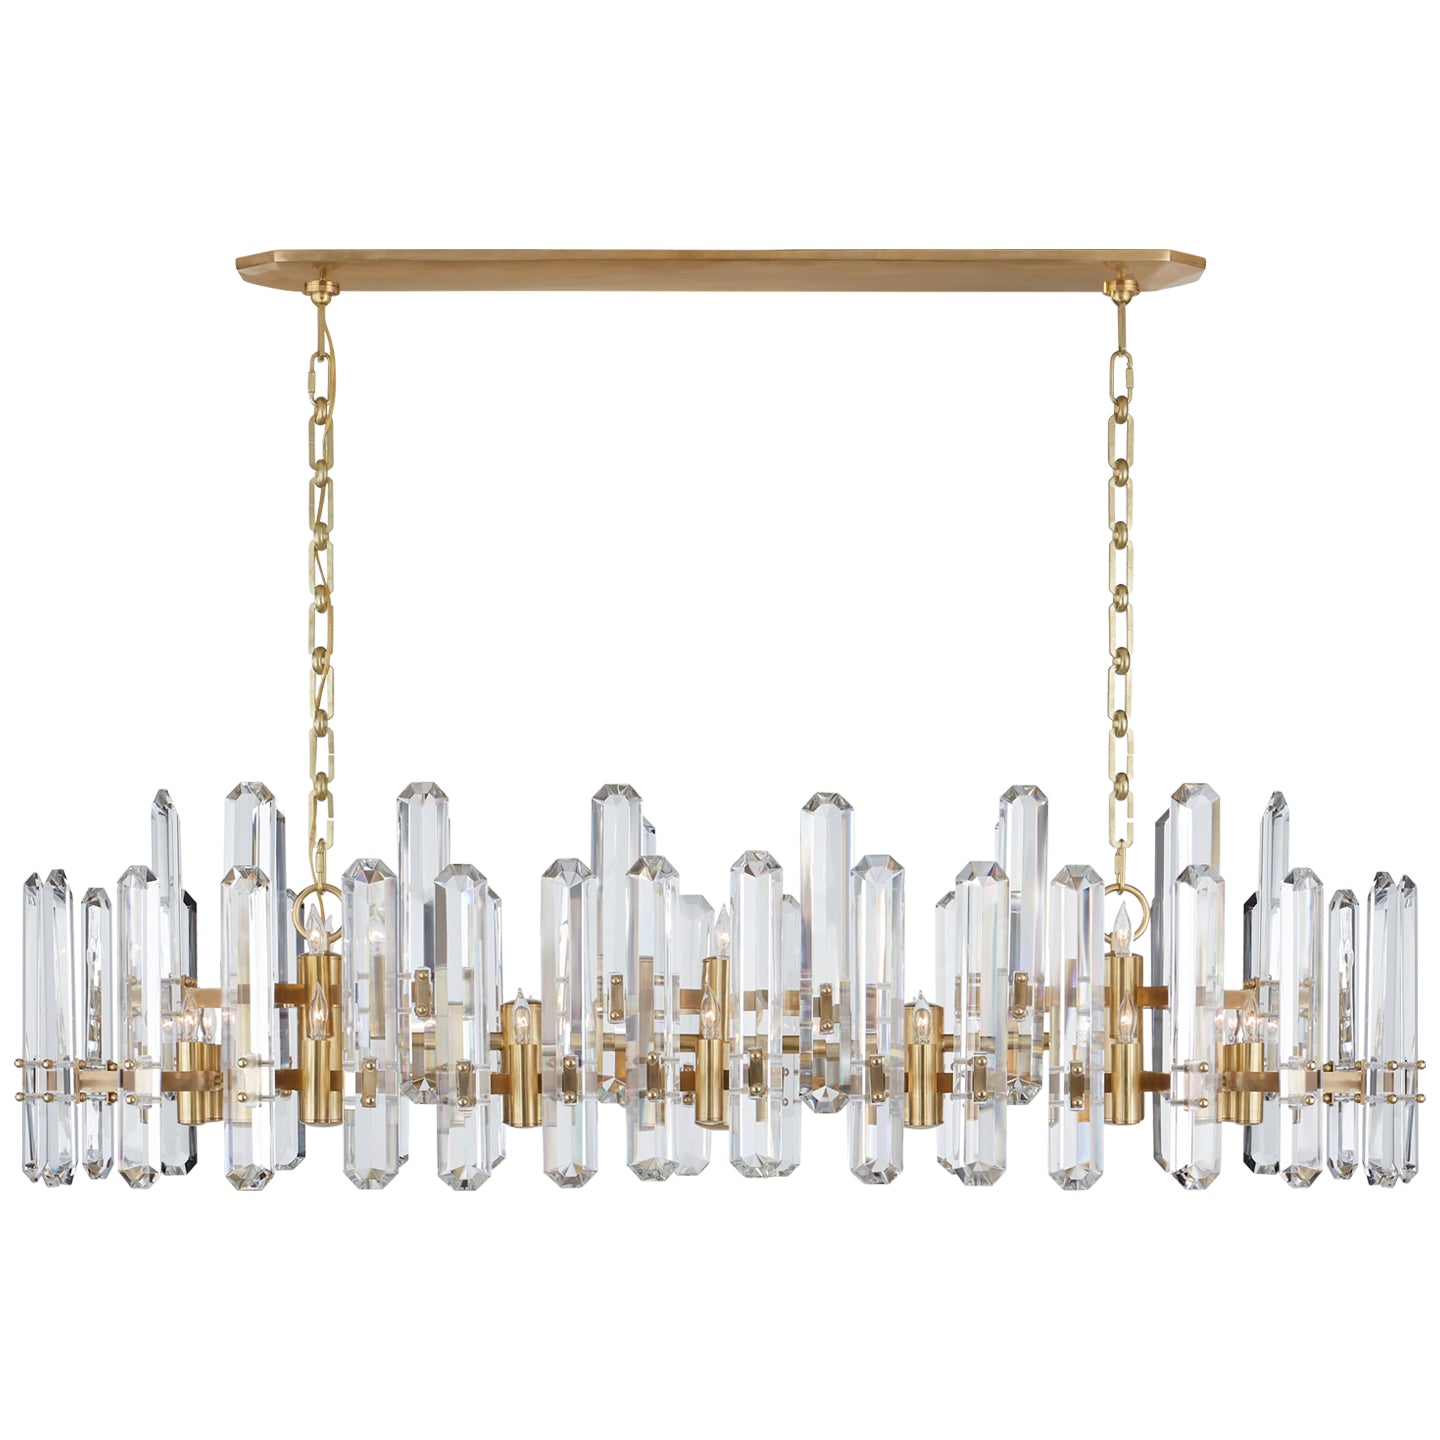 Load image into Gallery viewer, Visual Comfort Signature - ARN 5127HAB-CG - 24 Light Chandelier - Bonnington - Hand-Rubbed Antique Brass
